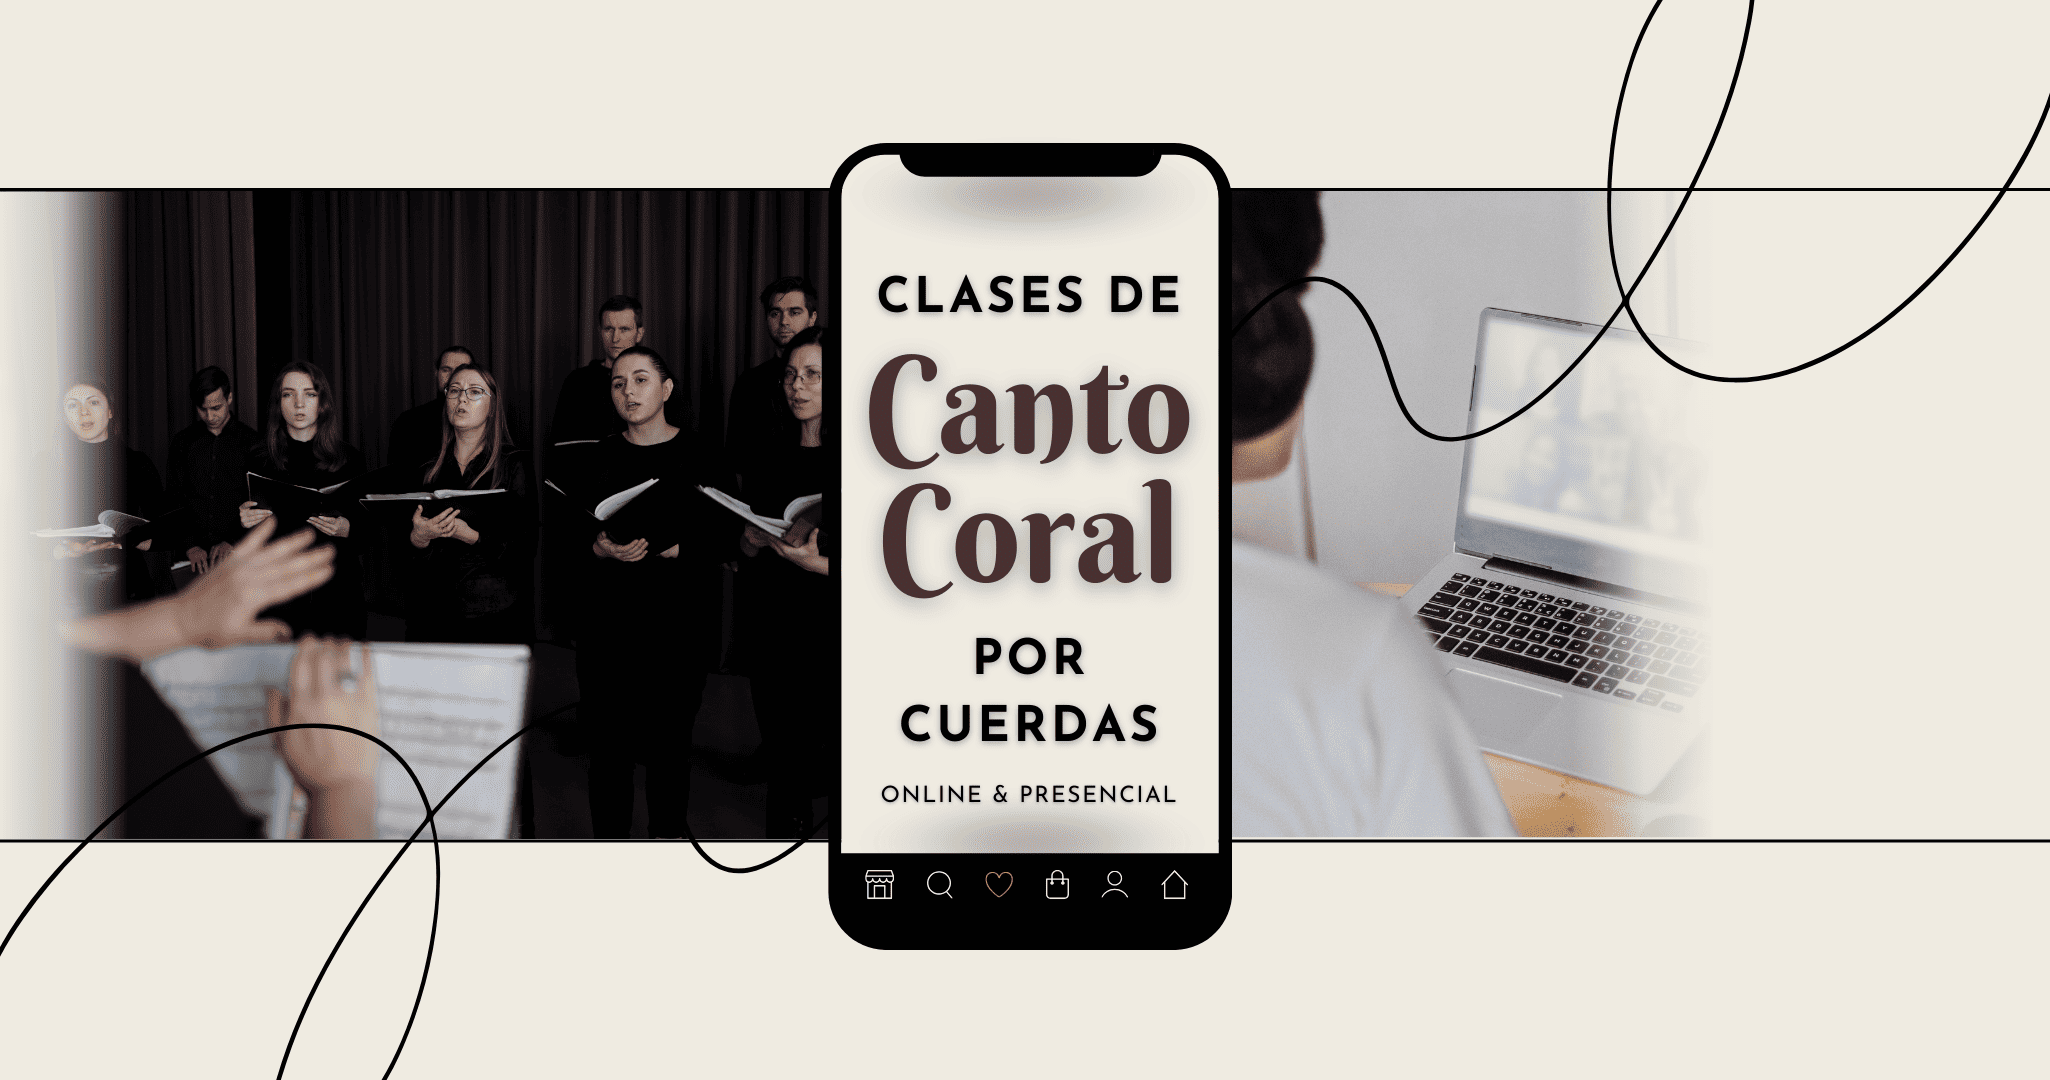 clases-canto-coral-cabecera